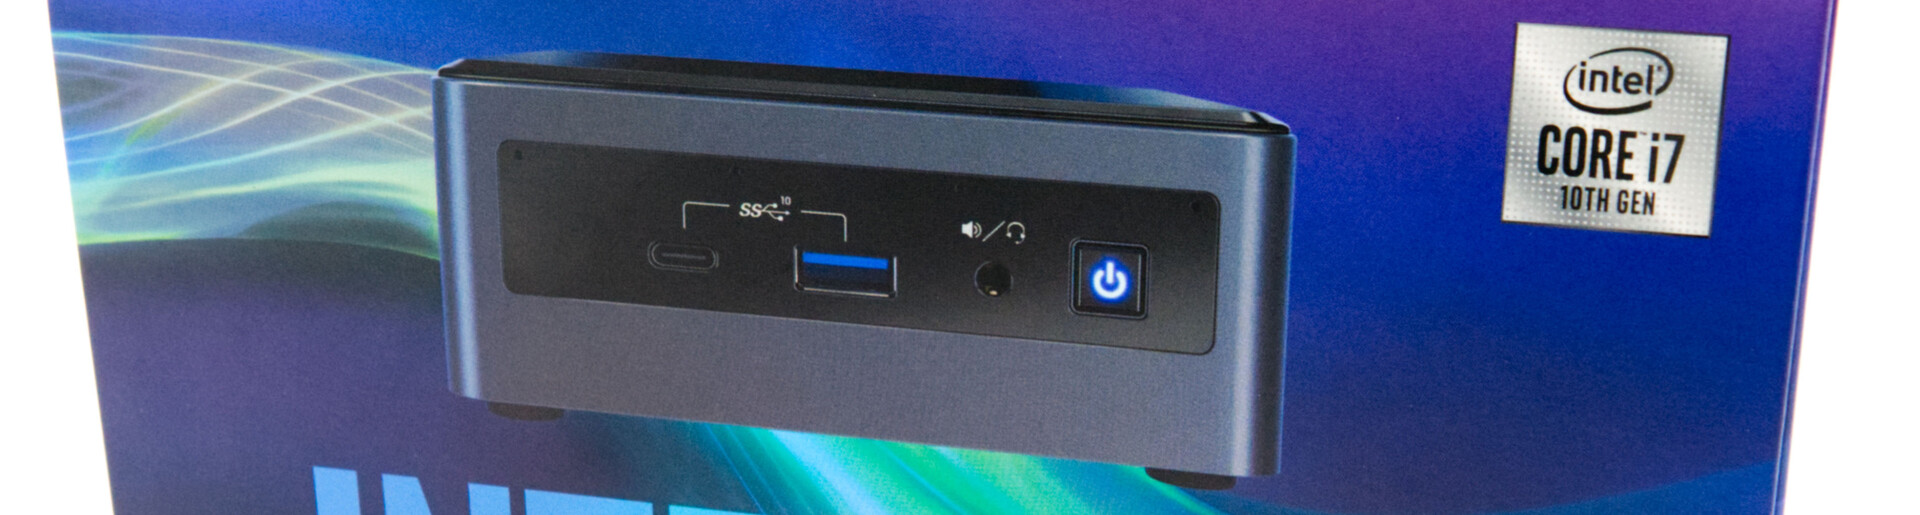 Frost Canyon NUC offers cores and 12 threads - Reviews